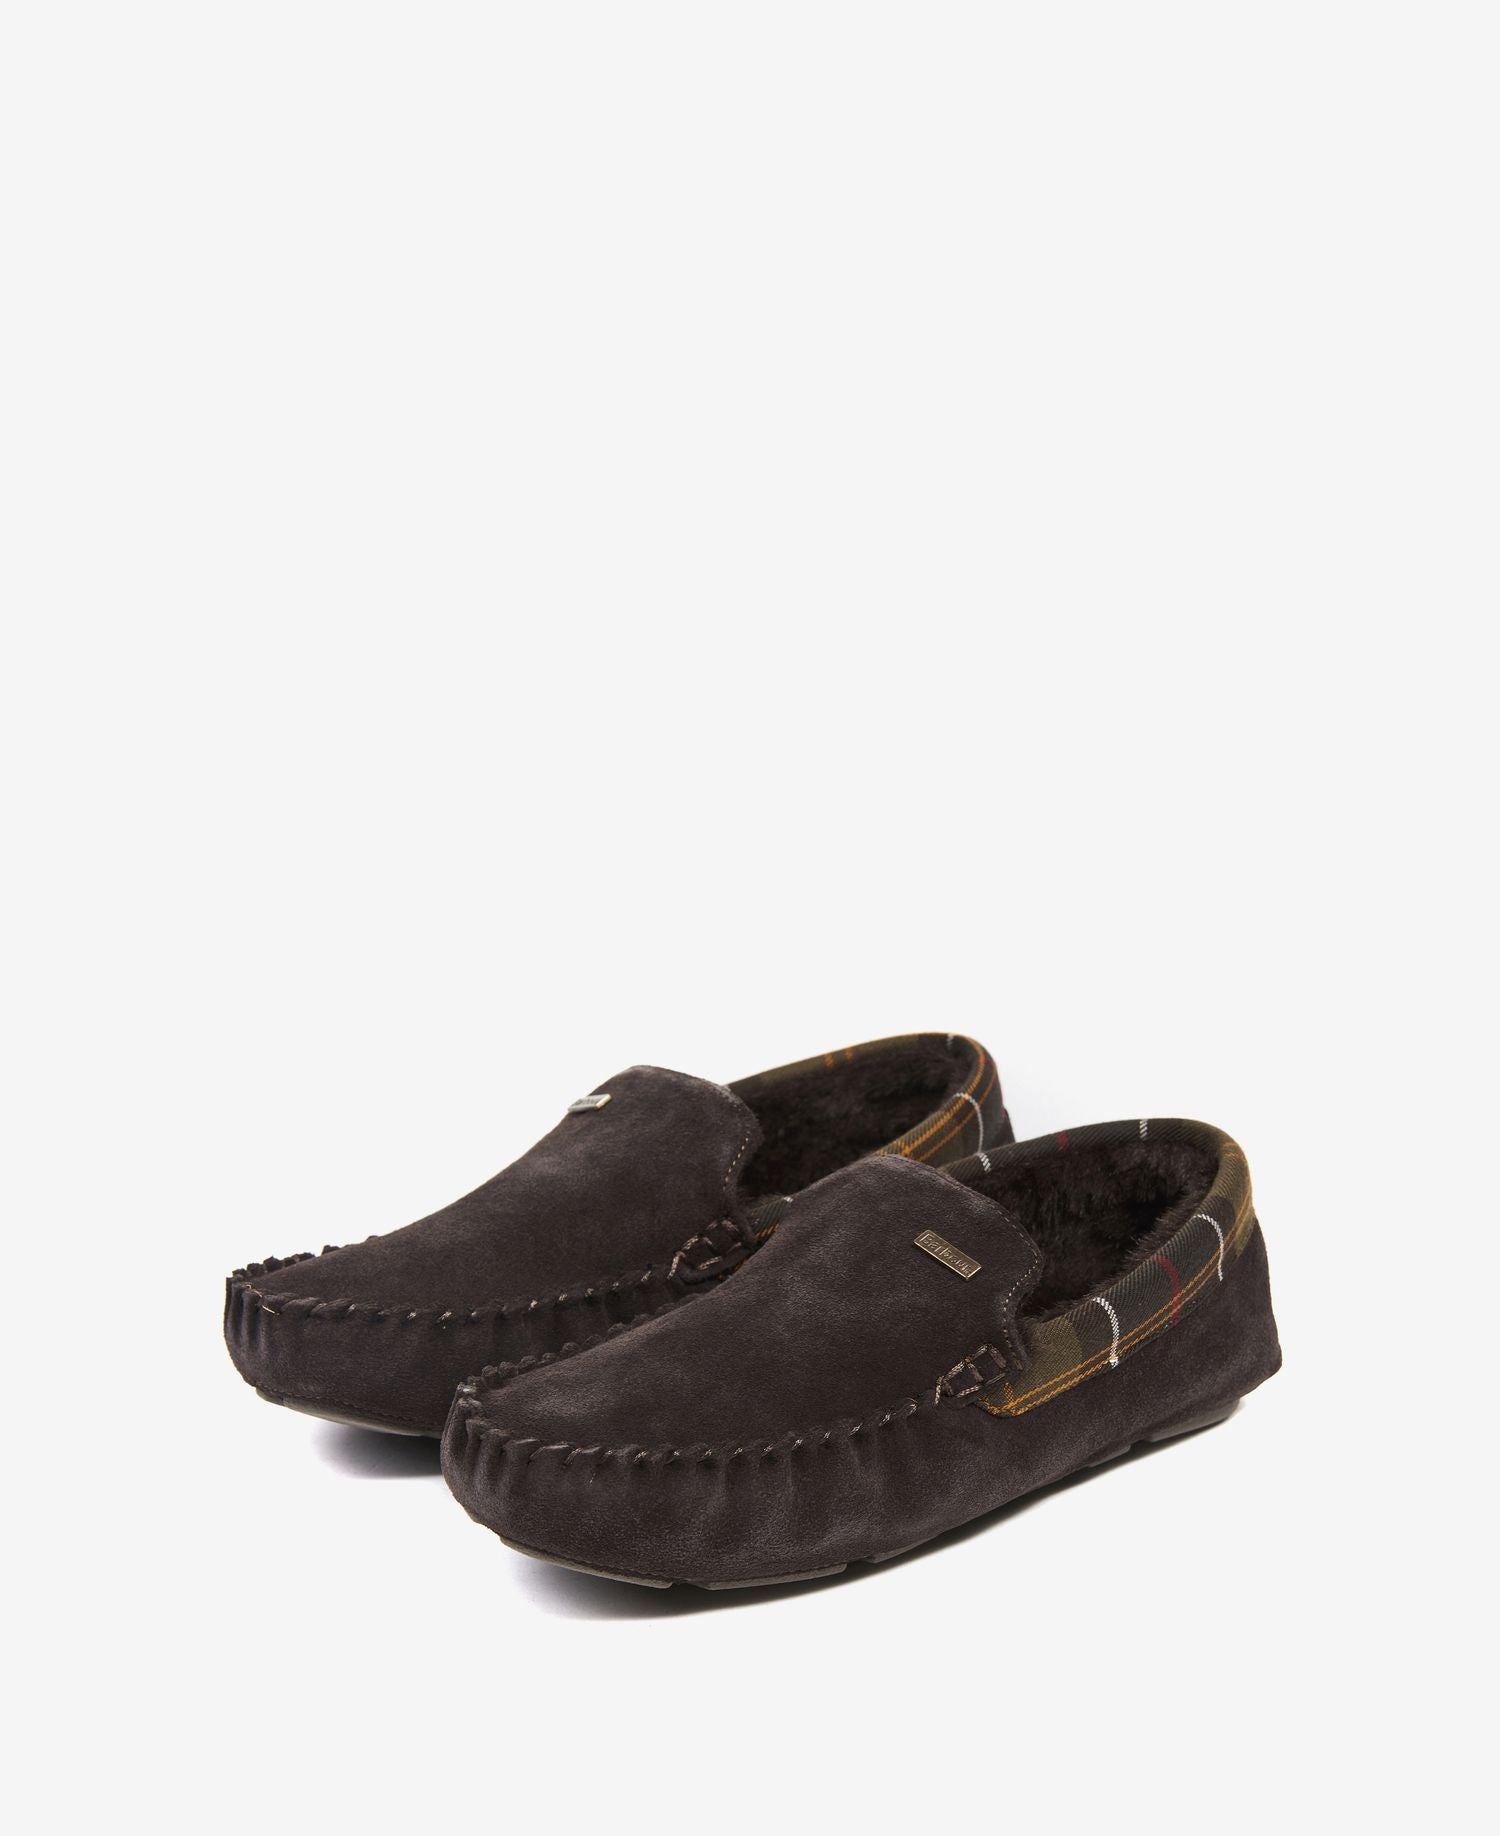 Monty Slippers - Brown Suede